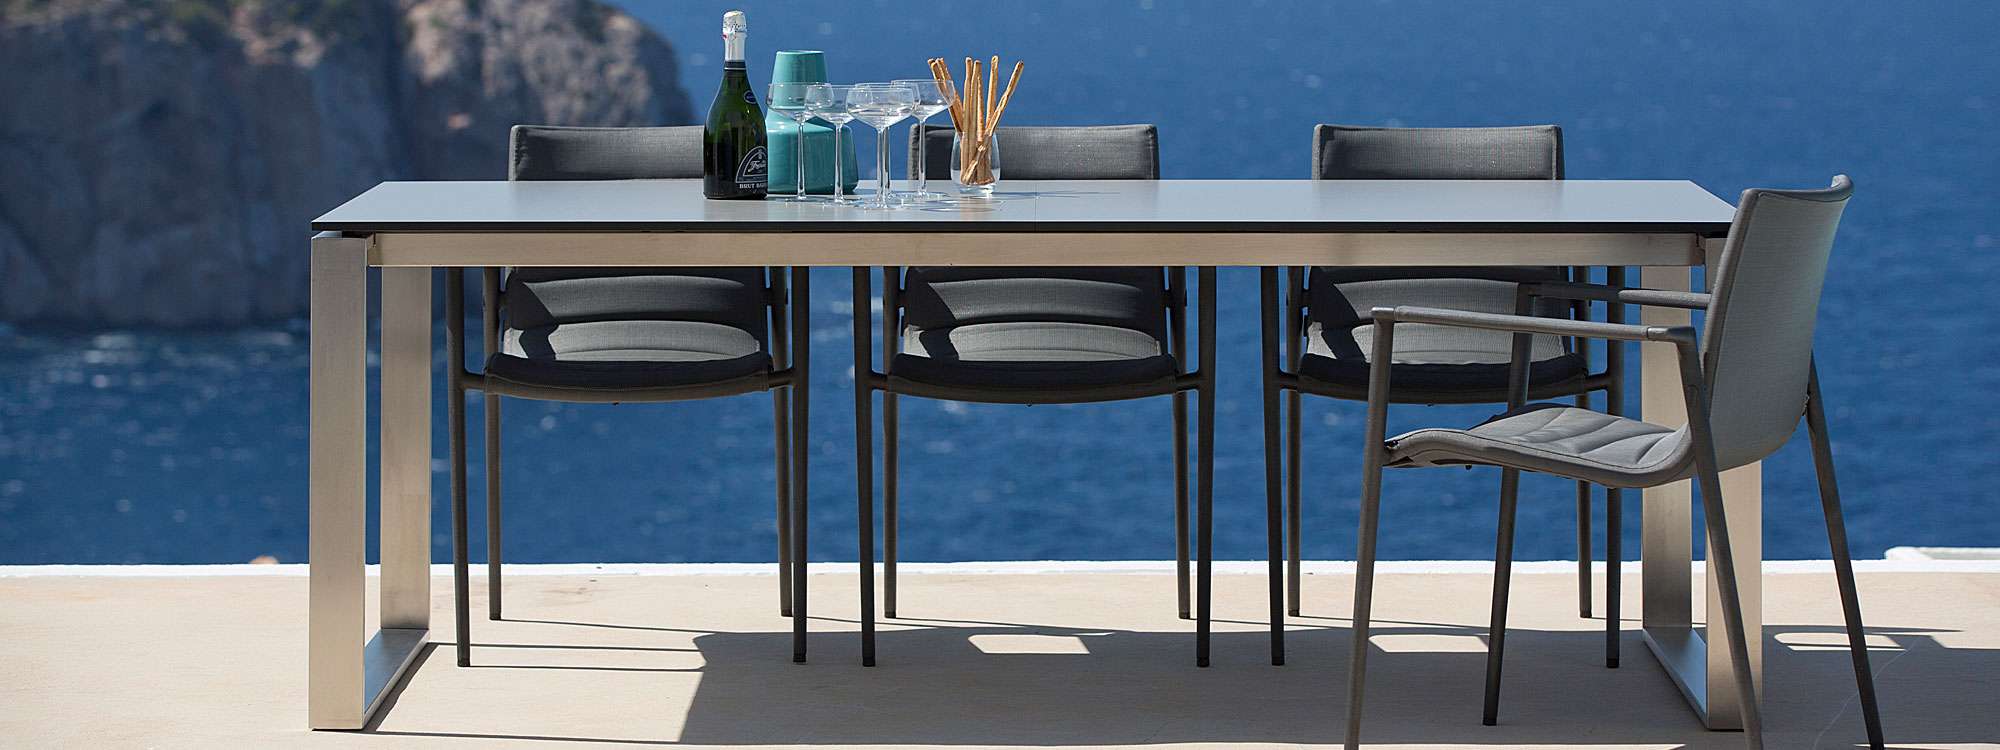 Image of Core garden chairs around Cane-line dining table on terrace, with sea and cliffs in background